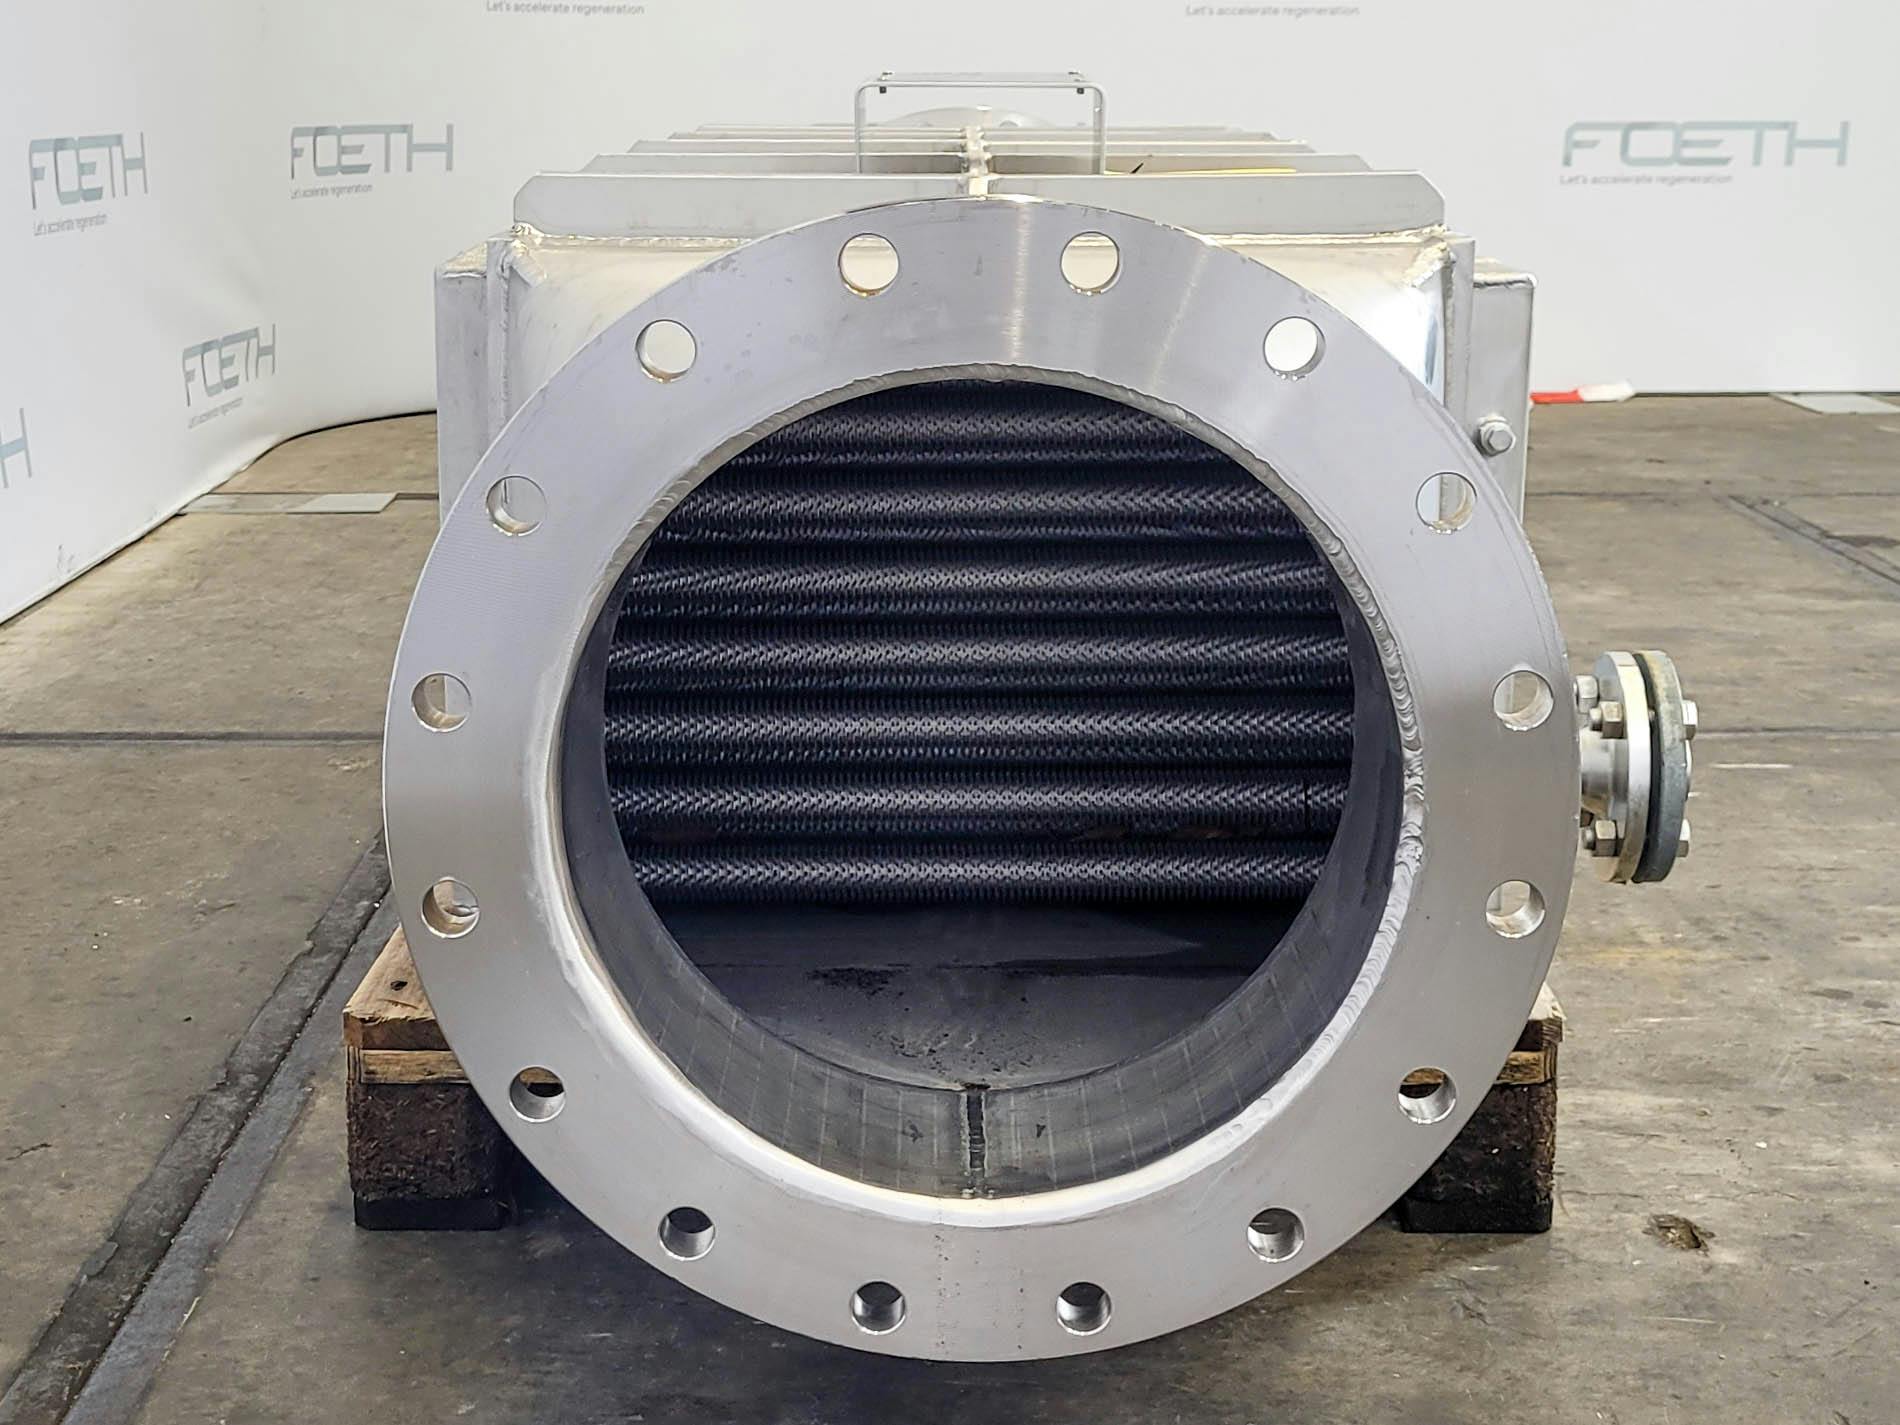 Enco "Finned / Rippenrohr" - Shell and tube heat exchanger - image 5